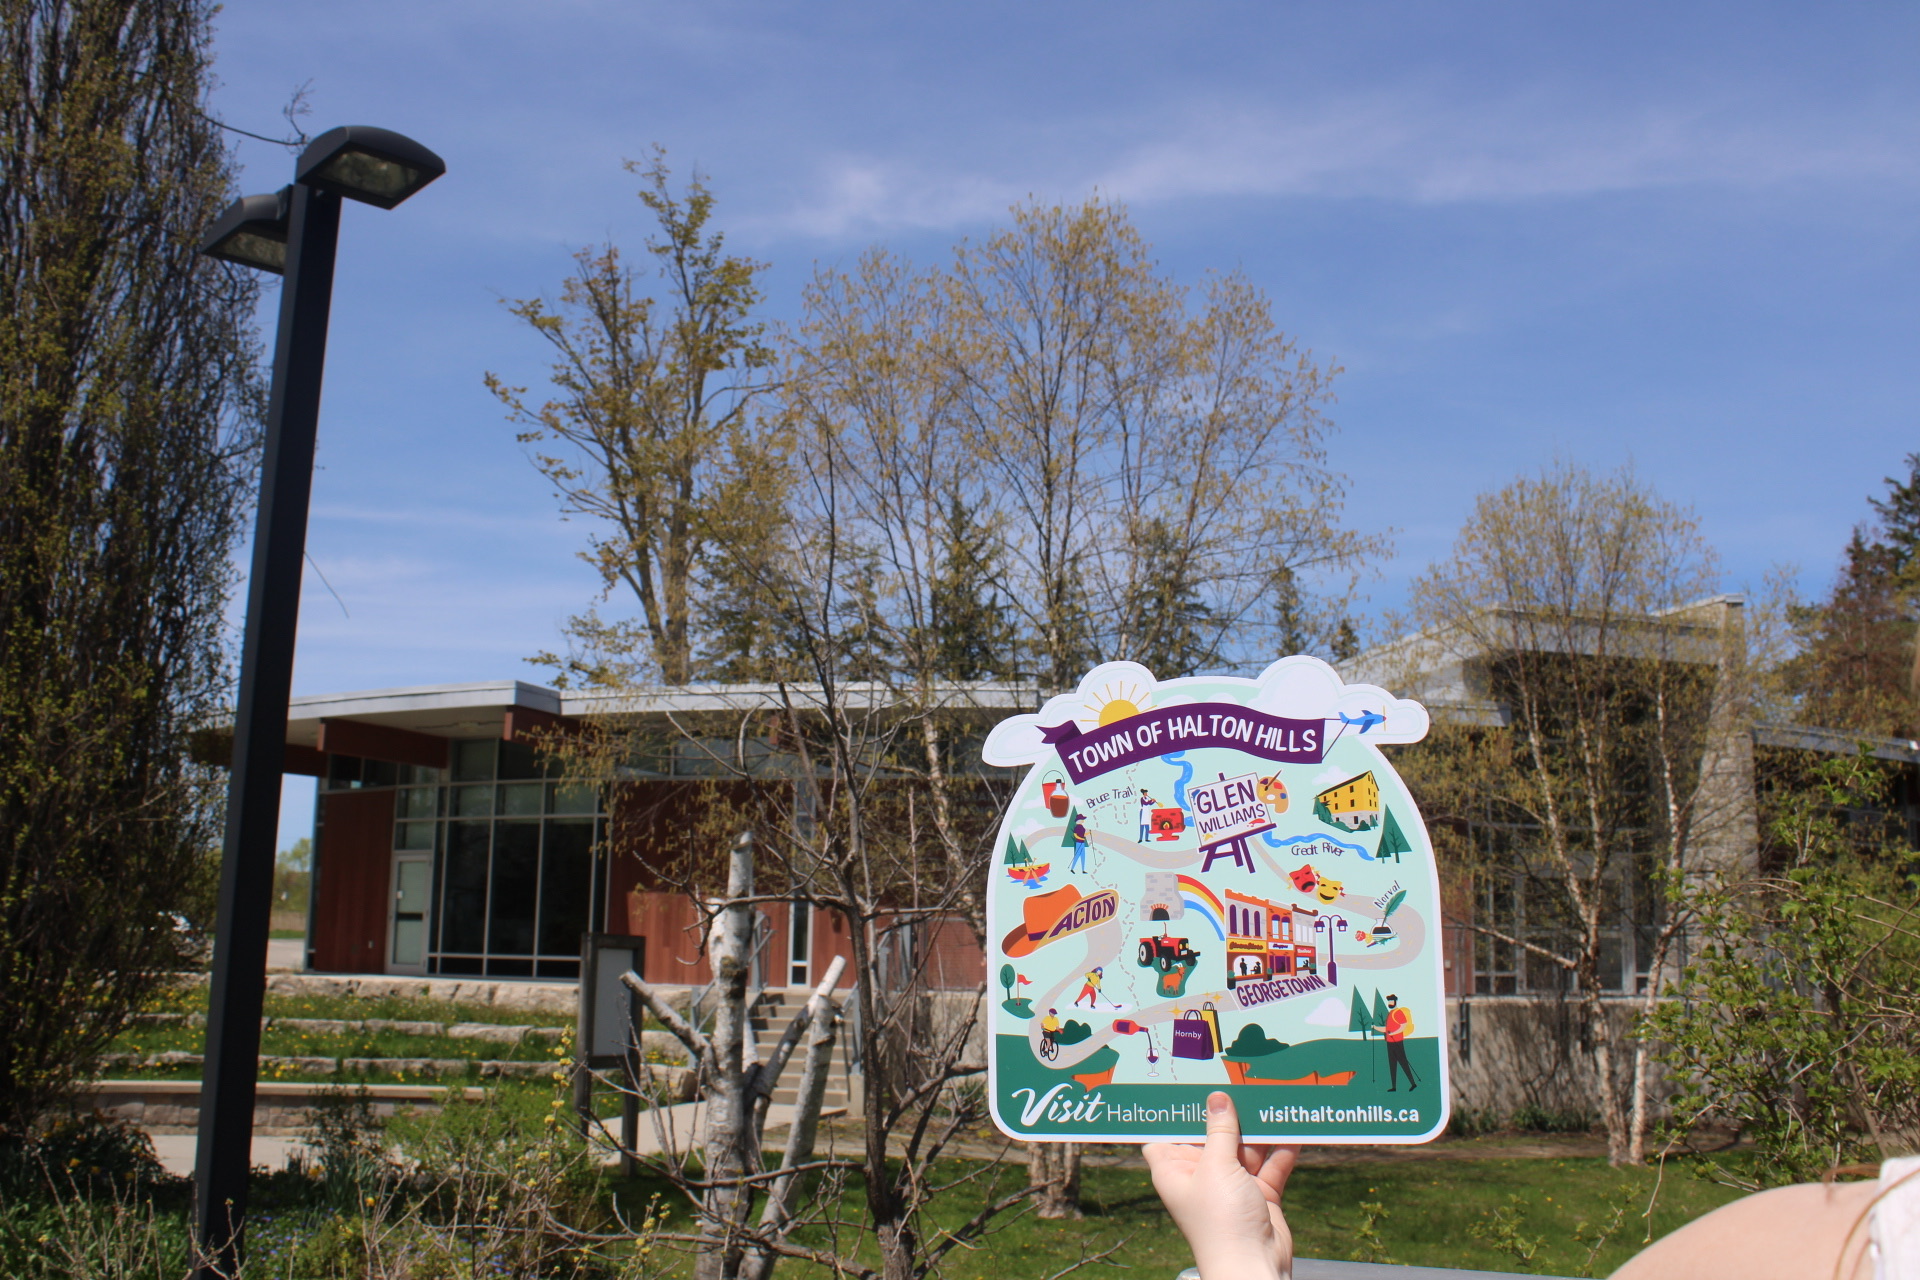 A hand holding up a large version of the sticker map. In the background is some trees and a brown building